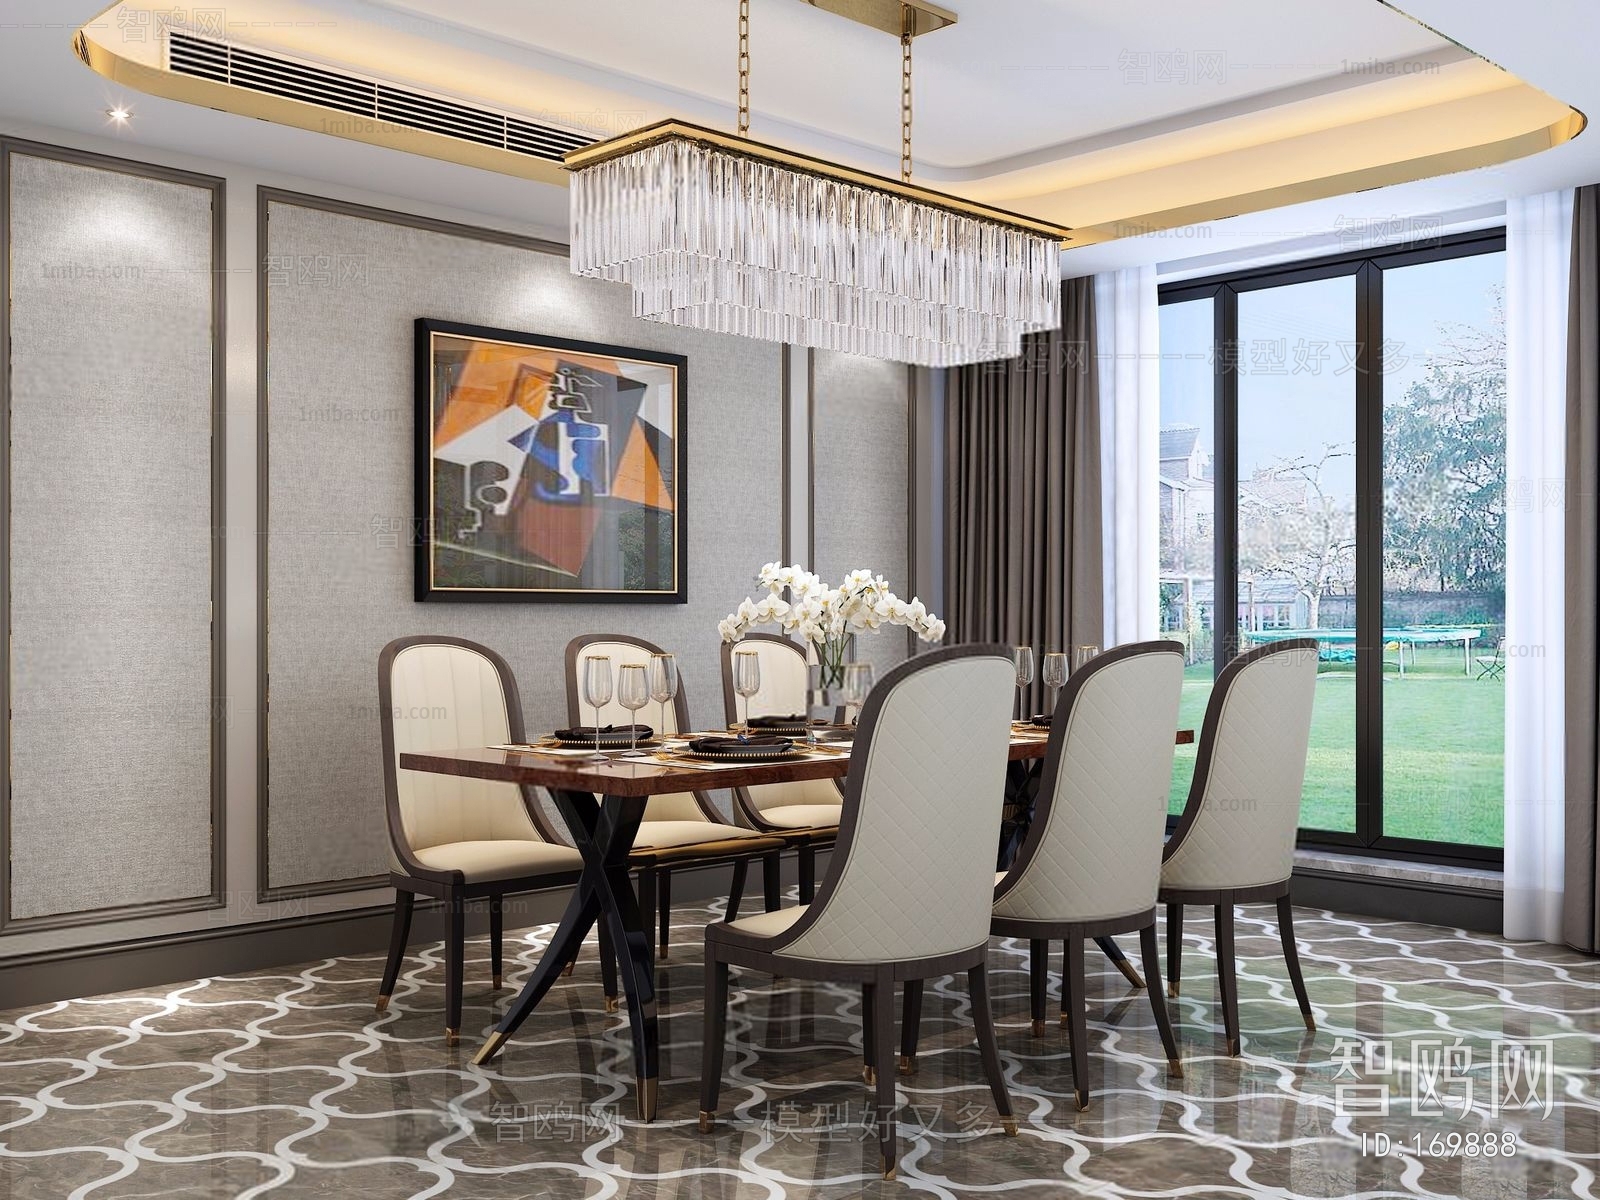 New Classical Style Dining Room